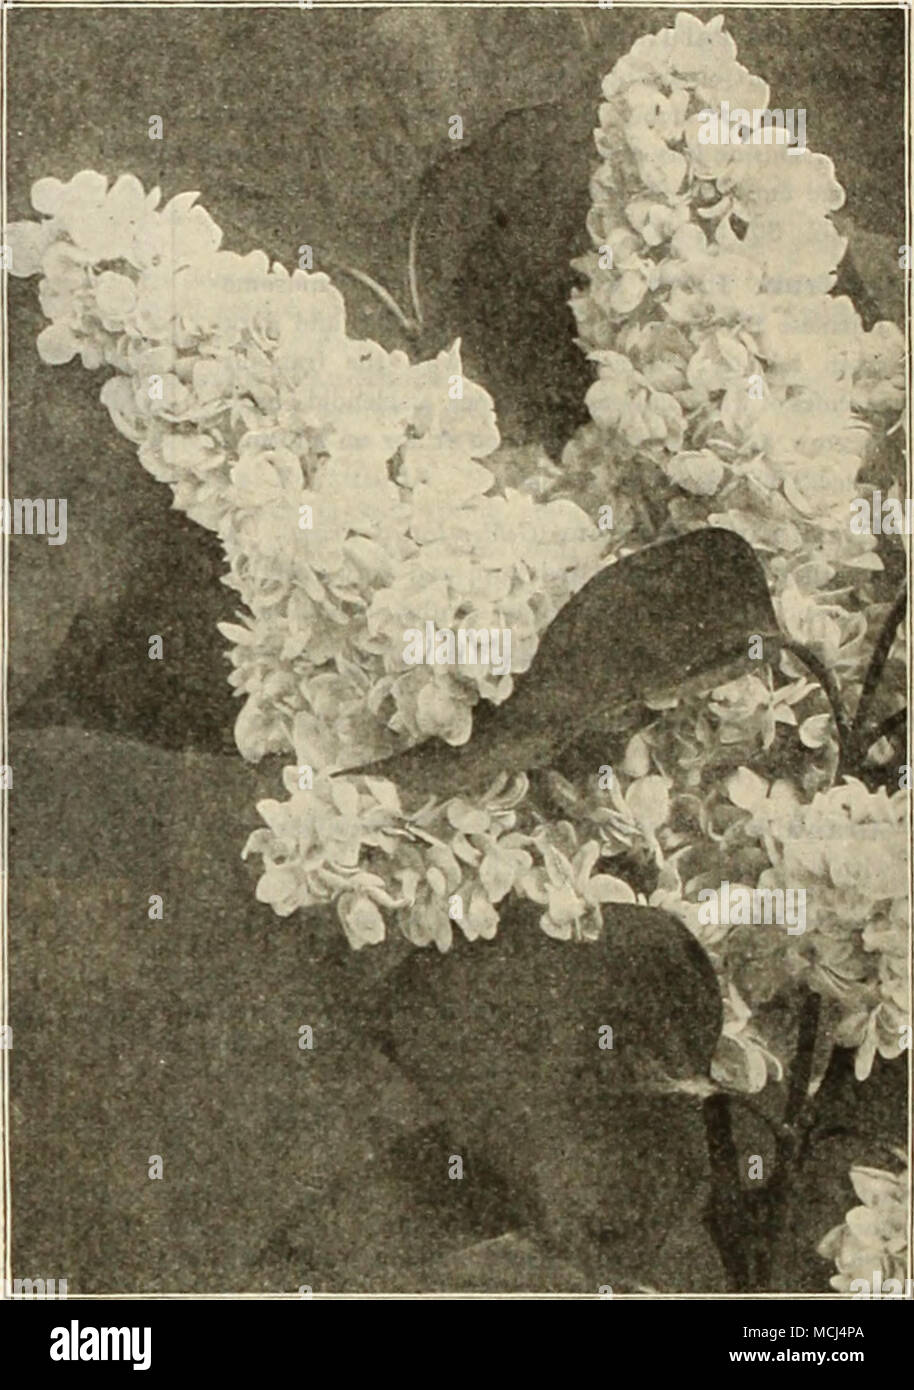 . V'lTEX M.CROPllVLL. Syringa or Lil.c, Mme. Marie I.e.moin-e — President Grevy. Magnificent panicles of large double purplish-blue flowers. St.00 each. Stephanandra Flexuosa. Of grateful fountain-like habit of growth with finely and delicately cut leaves which in the autumn assume brilliant reddish tints; the flowers are creamy white. 60 cts. each. Tamariz Africana (Tamarisk). Strong, slender, tall-growing, irregular Shrubs, with leathery foliage and small, delicate flowers, borne profusely on grace- fully-bending branches. These pink flowers are very attractive during May. 60 cts, each. — Stock Photo